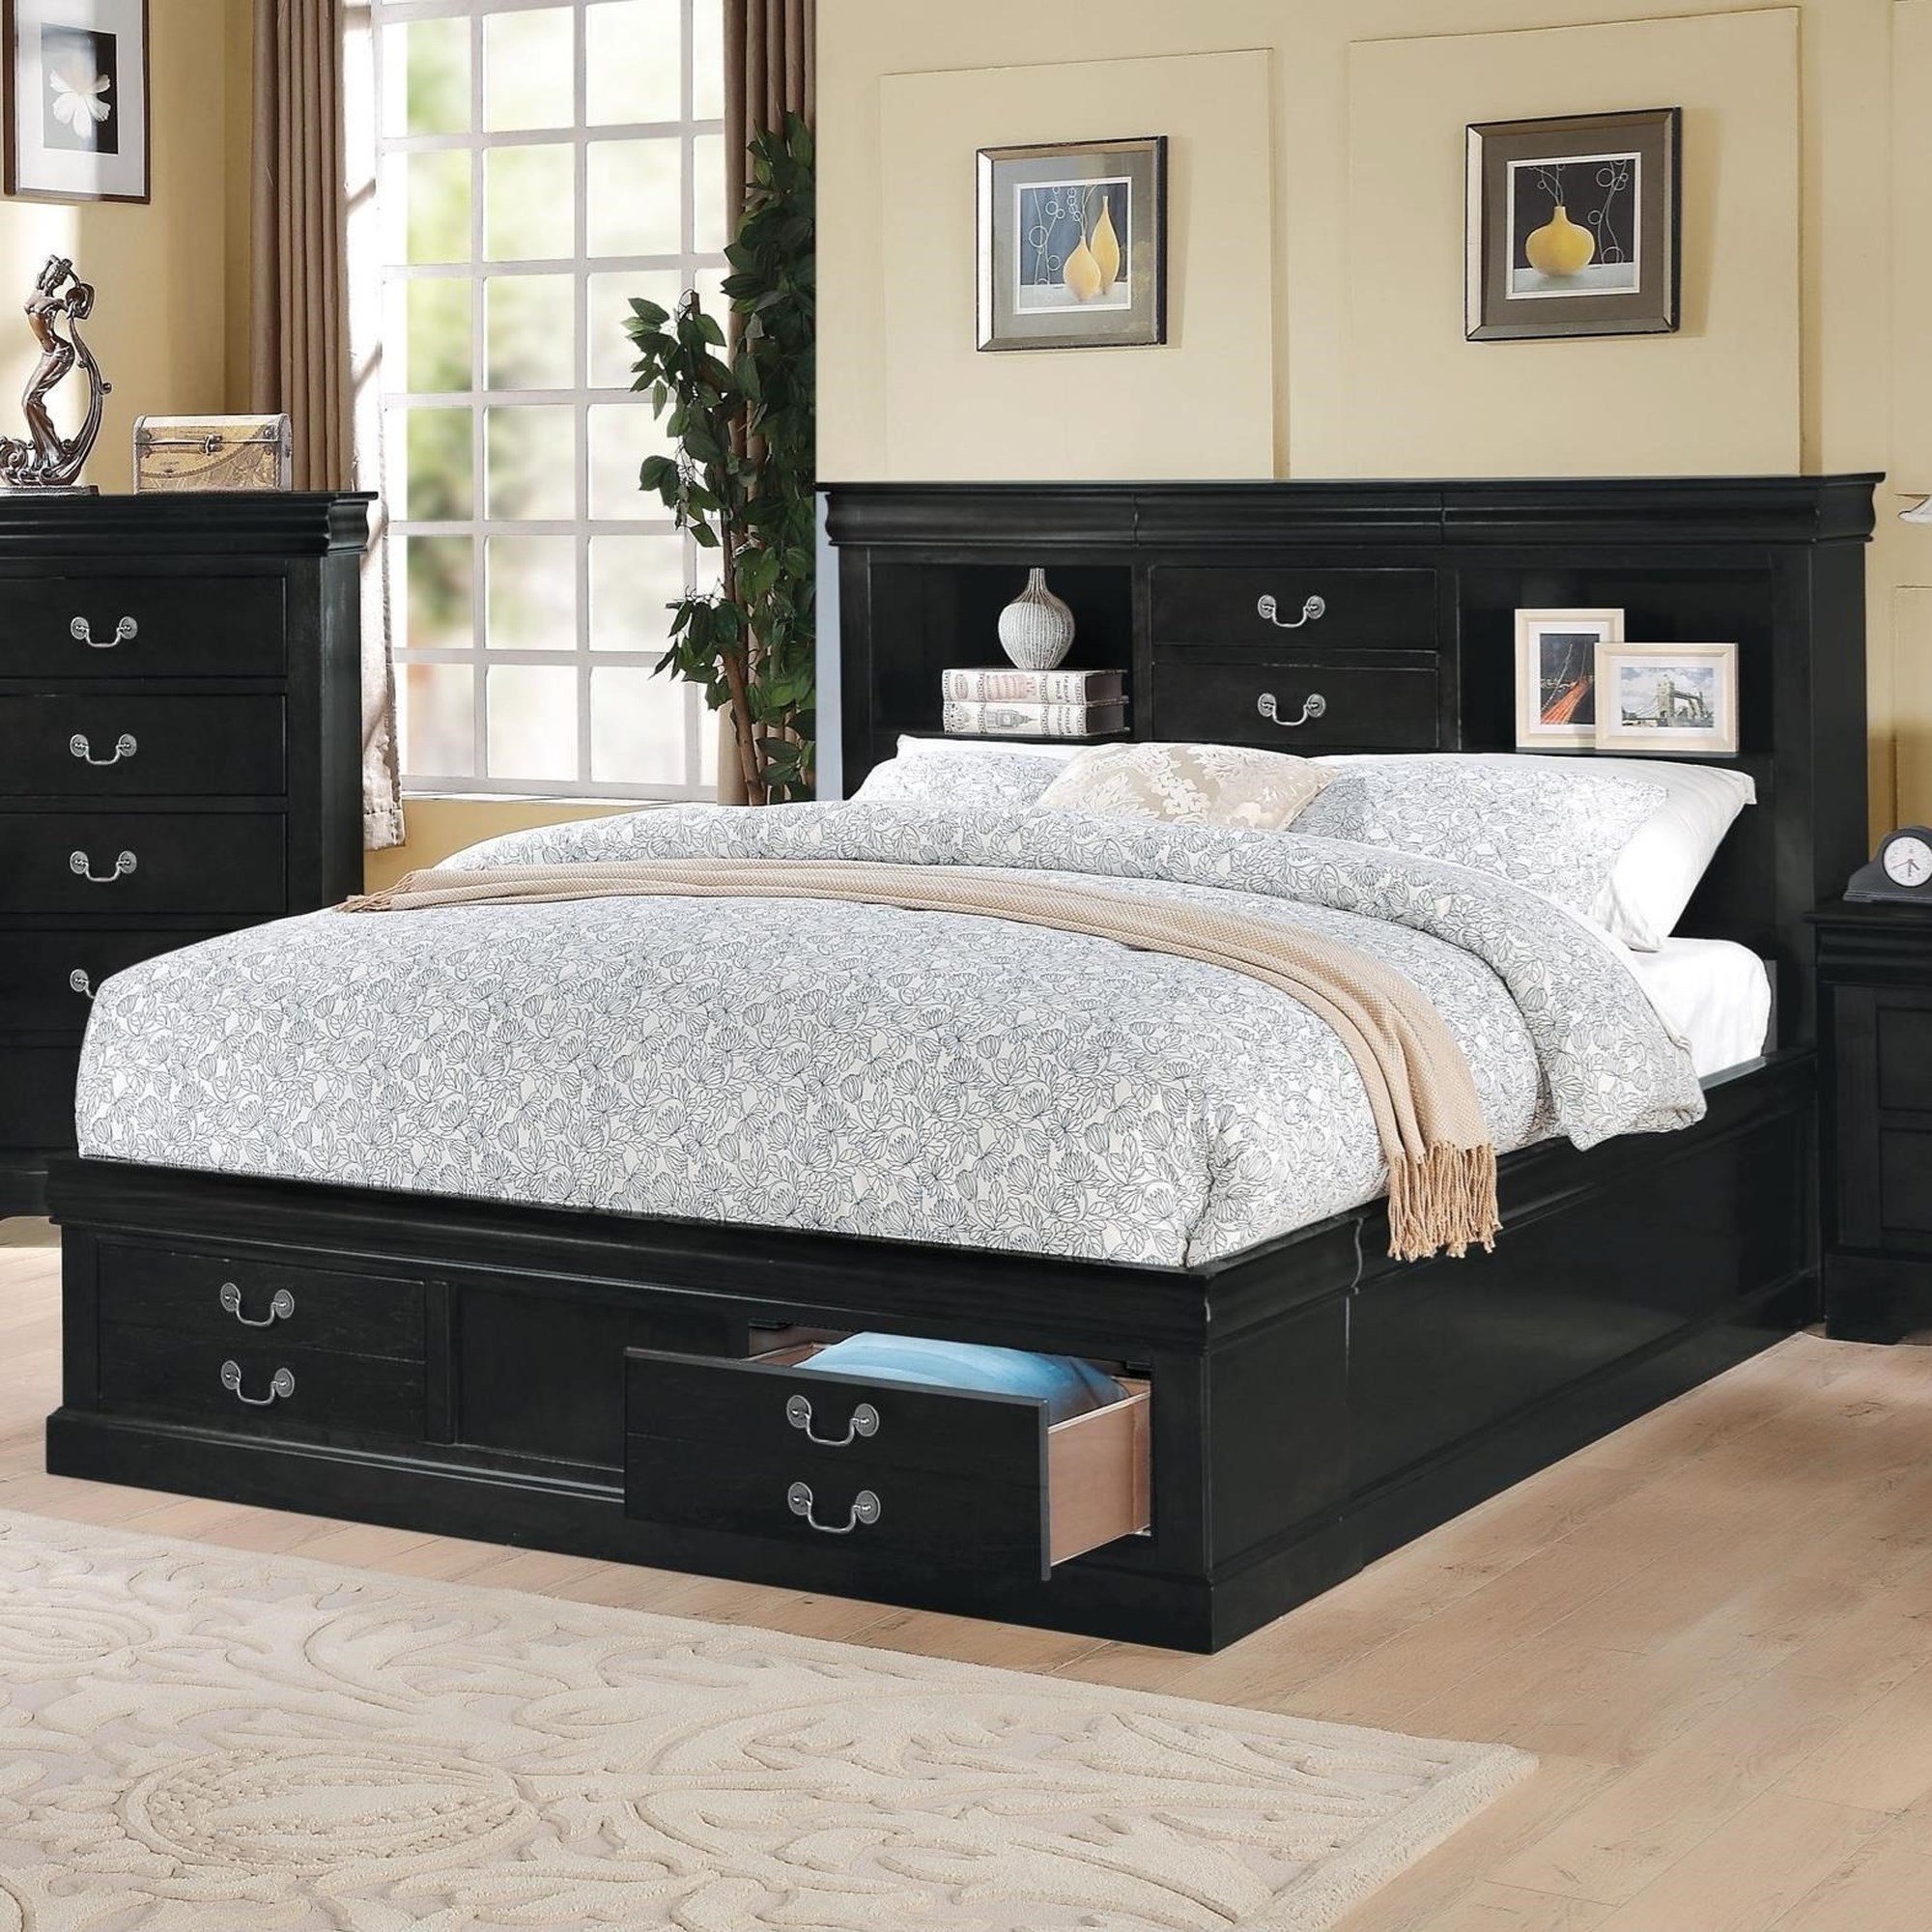 Traditional Style Louis Philippe III Queen Size Solid Pine Sleigh Bed with Headboard and Footboard - Black